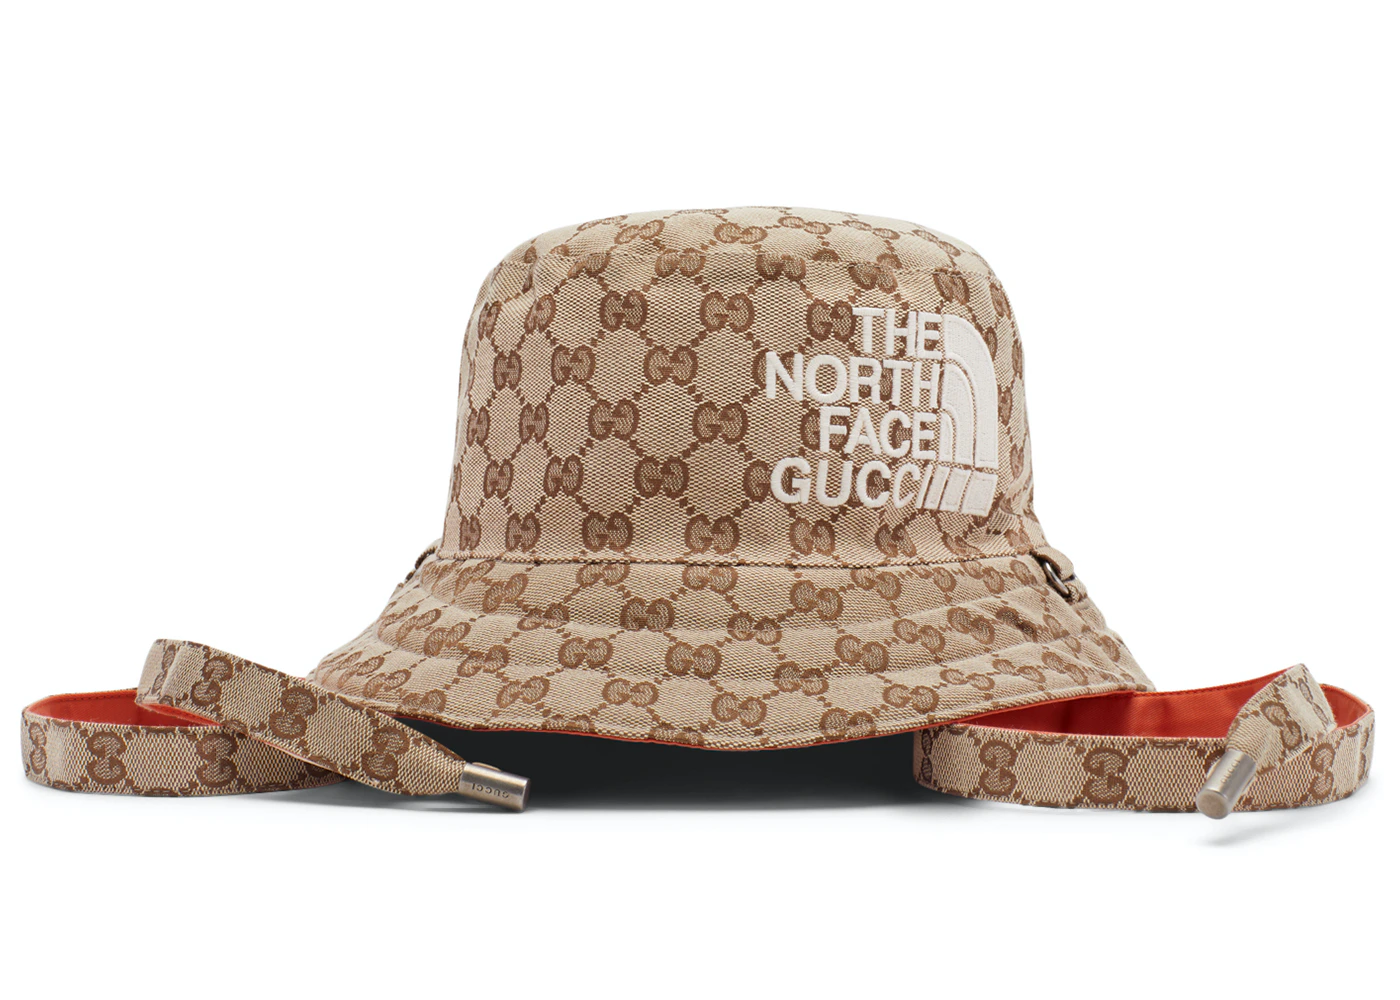 Gucci x The North Face GG Canvas Bucket Hat Beige/Ebony in Canvas - US